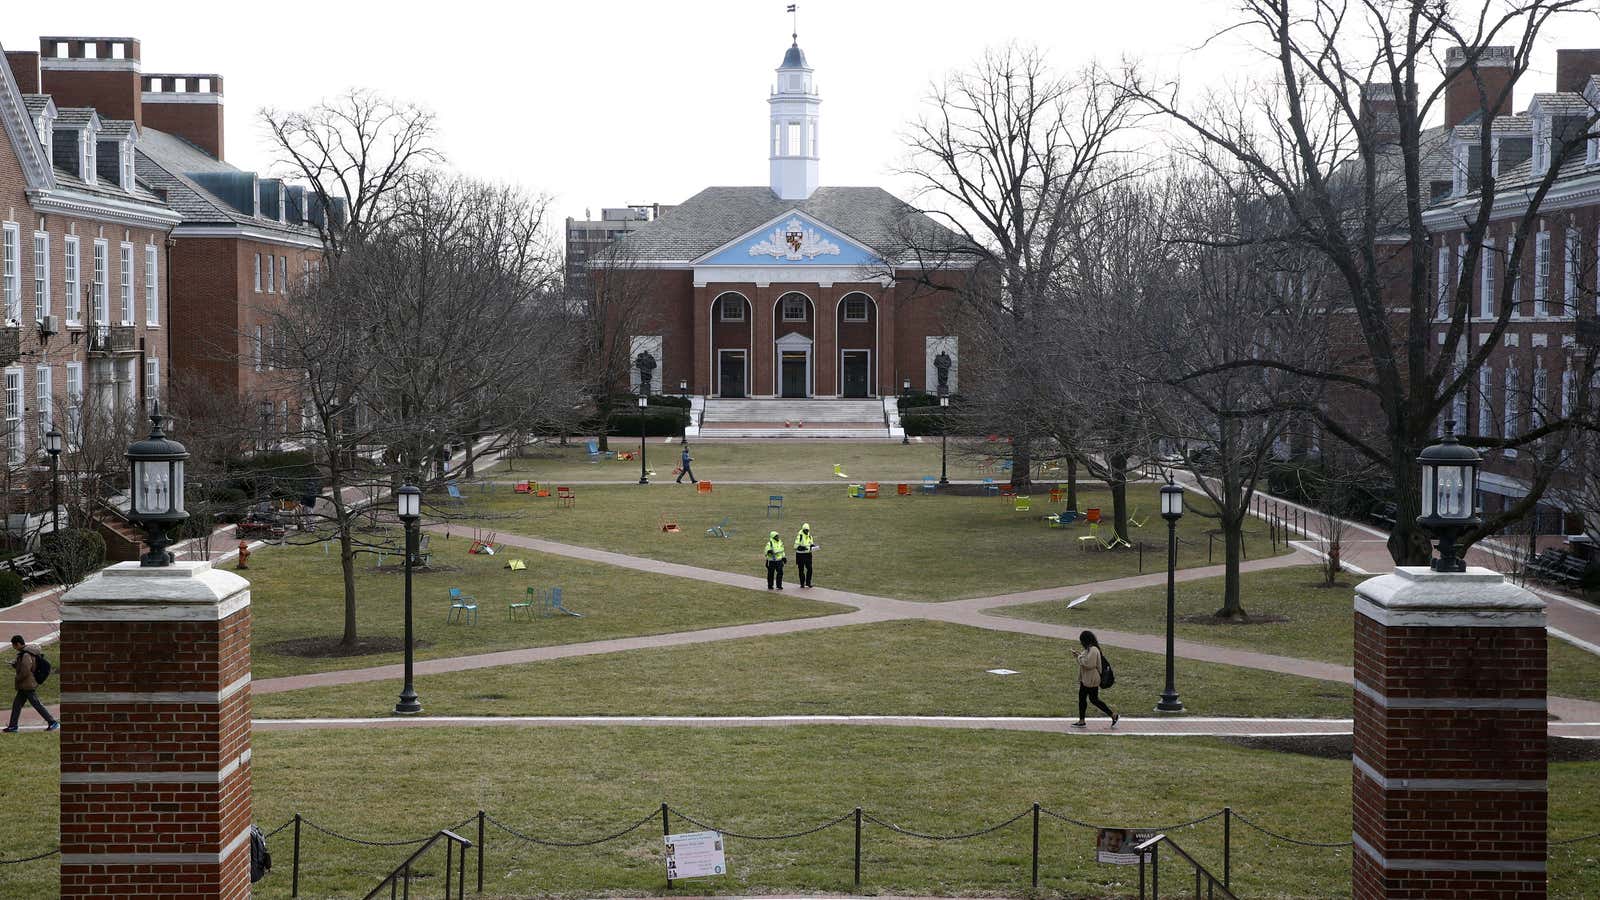 Legacy admissions are a thing of the past at Johns Hopkins University.